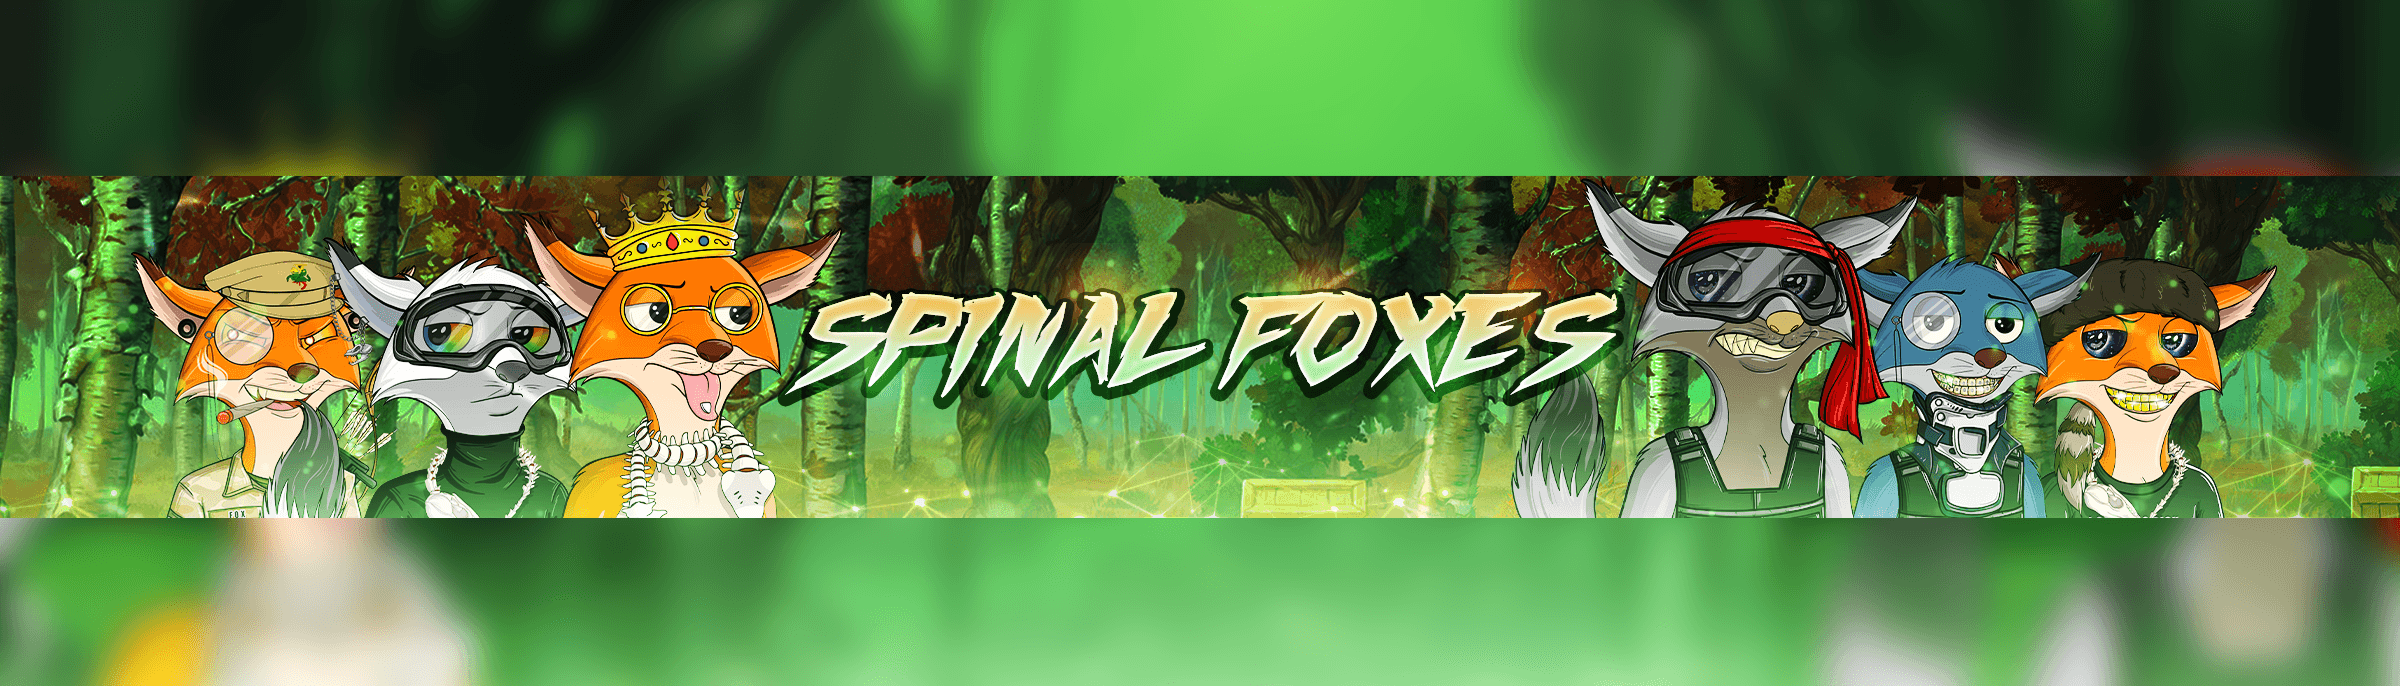 SpinalFoxes banner